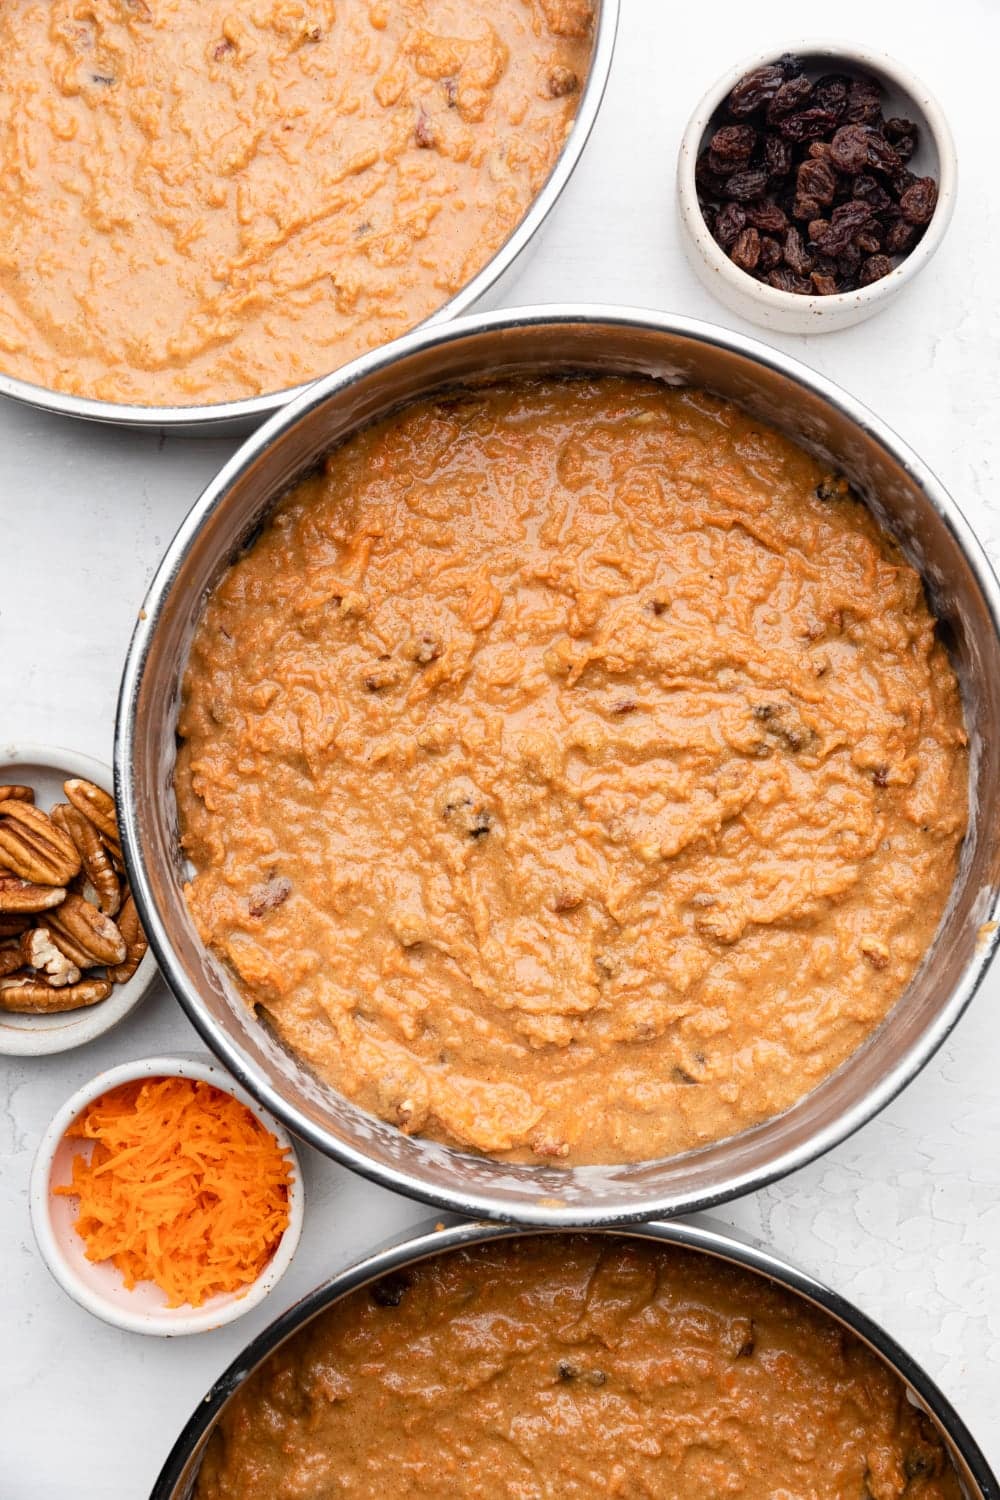 carrot cake better made with healthier ingredients in separate cake pans.